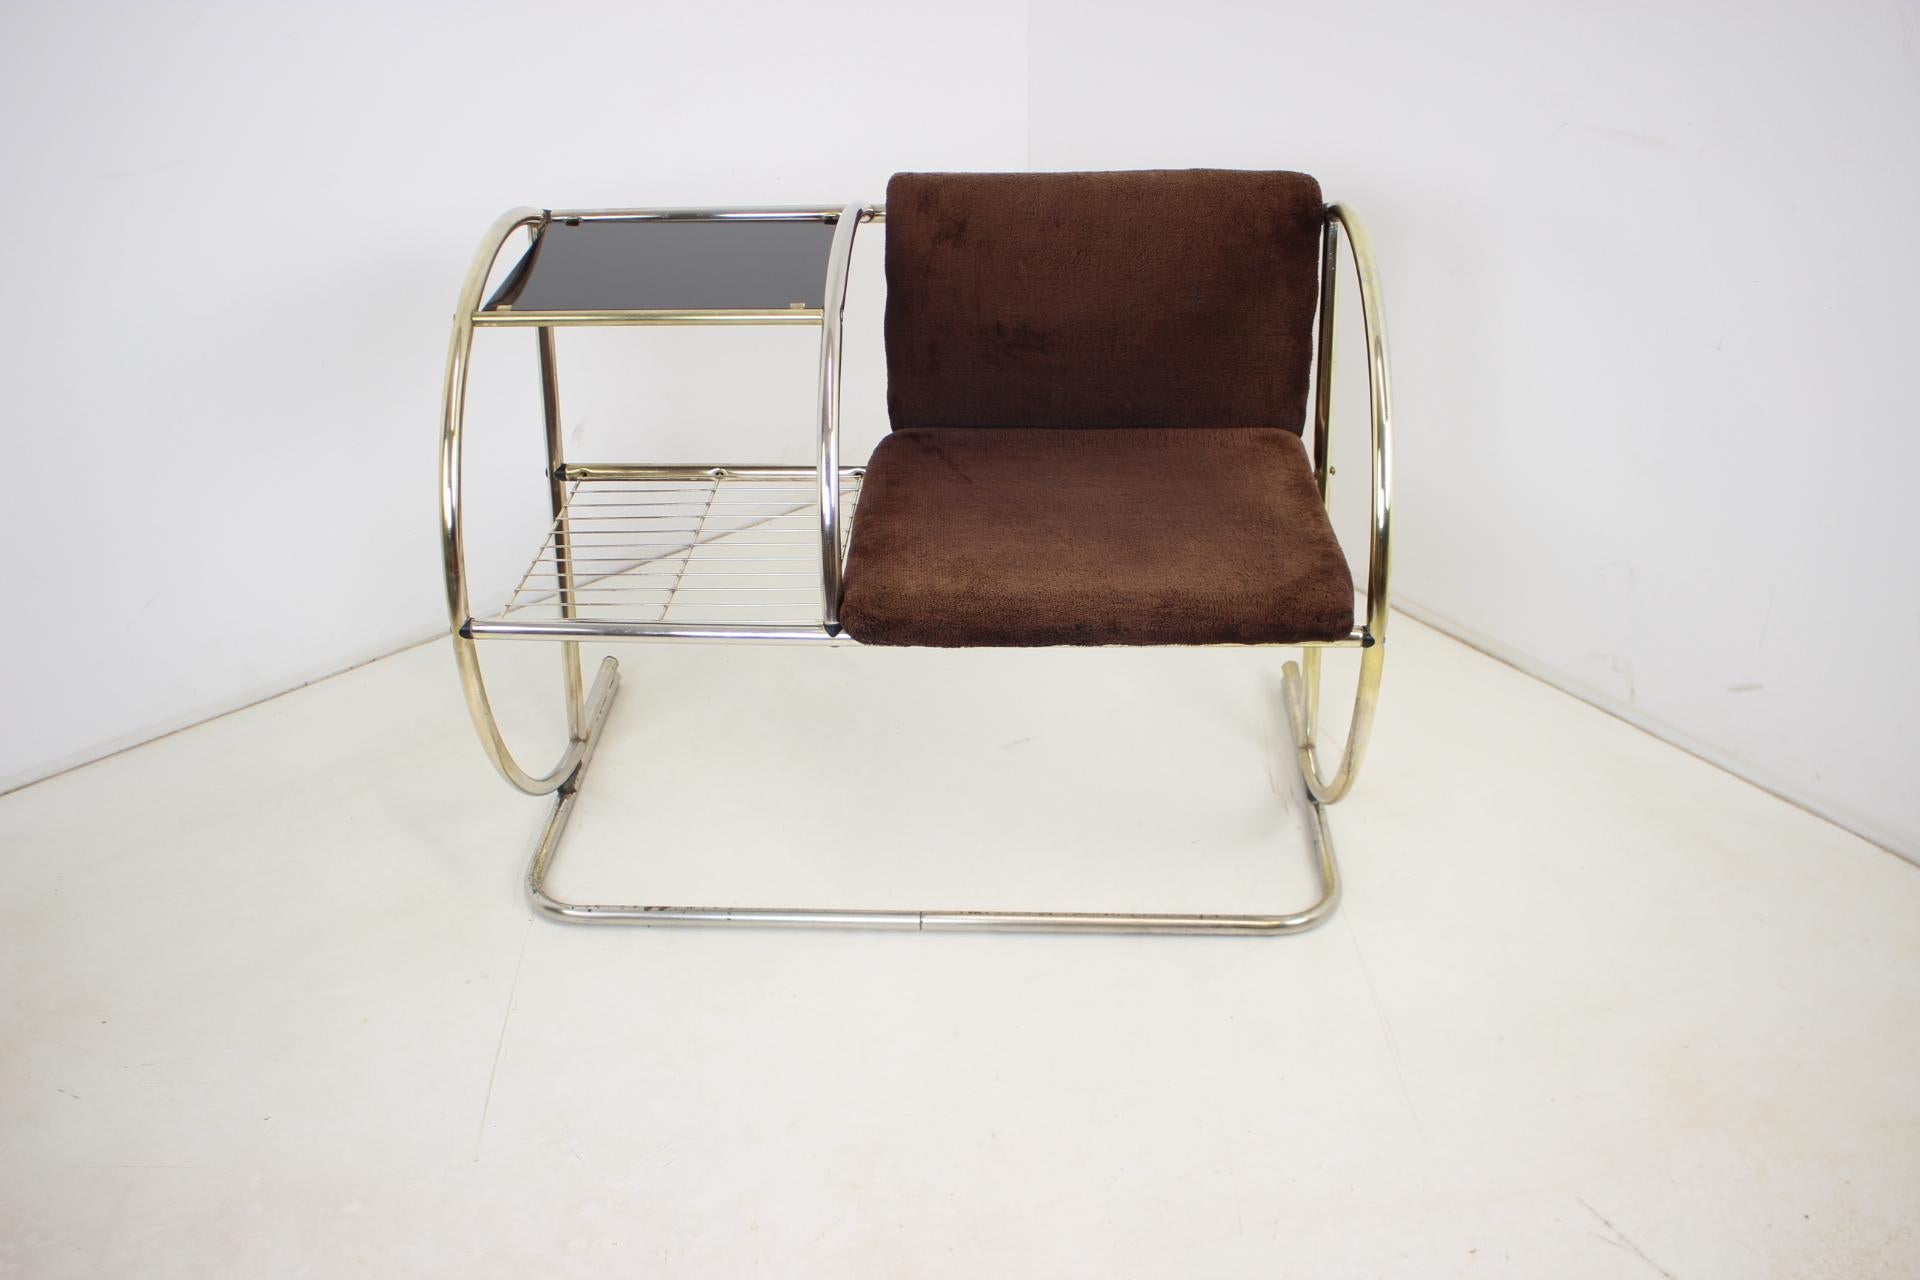 - Germany, 1970s
- Height of seat 40 cm.
- The brass is very worn.
 - A beautiful piece of design.